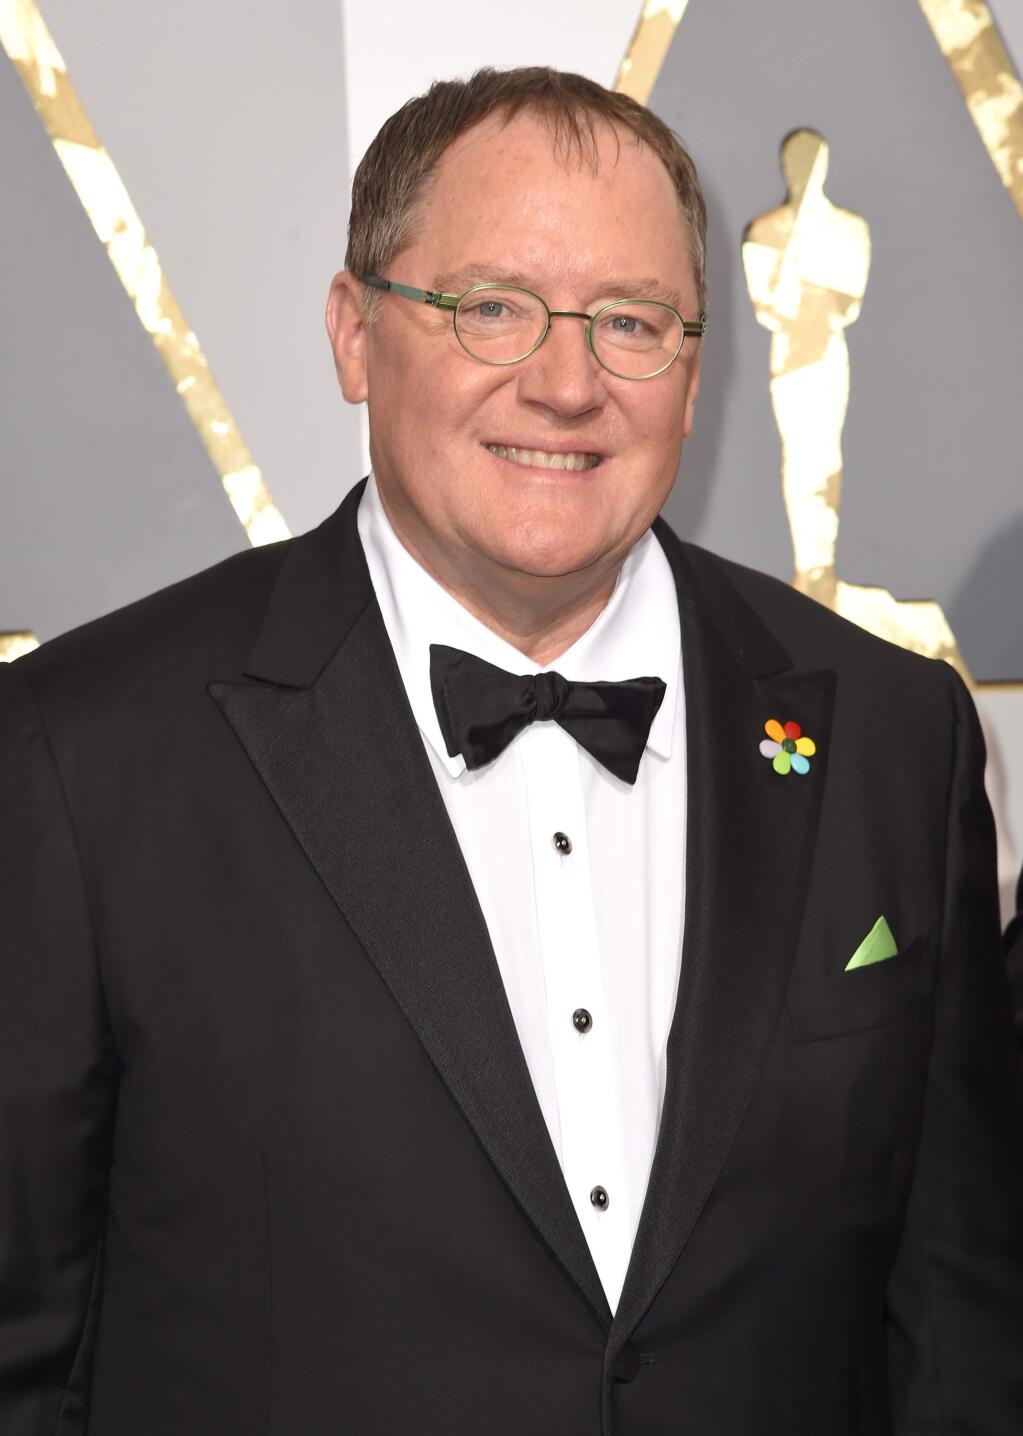 FILE - In this Feb. 28, 2016 file photo, Pixar co-founder and Walt Disney Animation chief John Lasseter arrives at the Oscars in Los Angeles. (Photo by Dan Steinberg/Invision/AP, File)